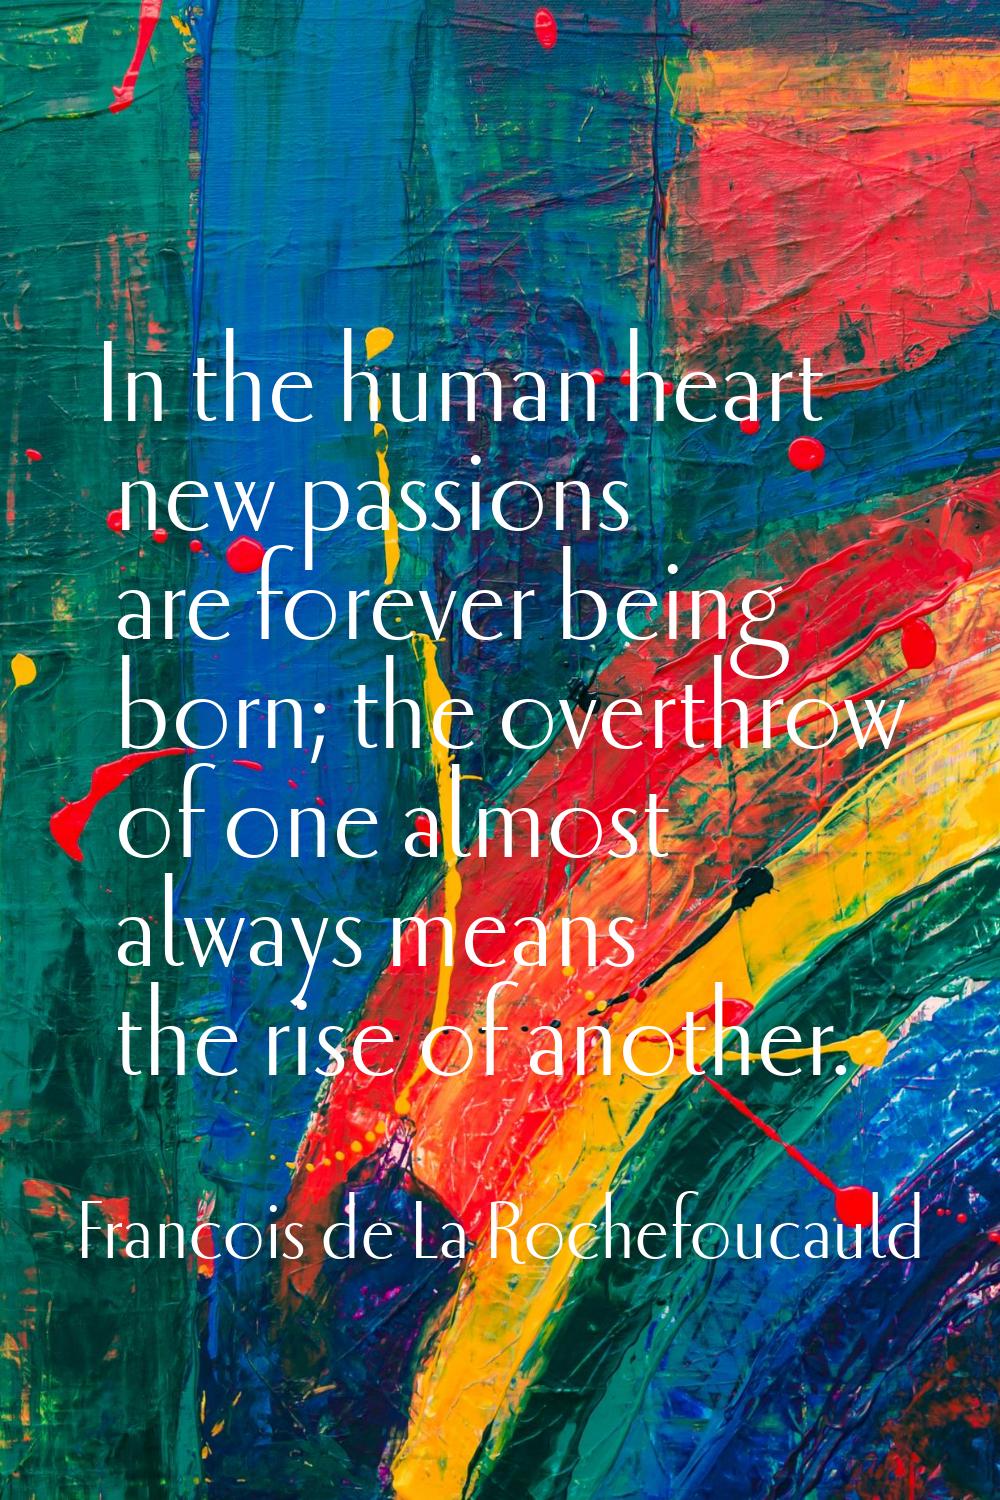 In the human heart new passions are forever being born; the overthrow of one almost always means th